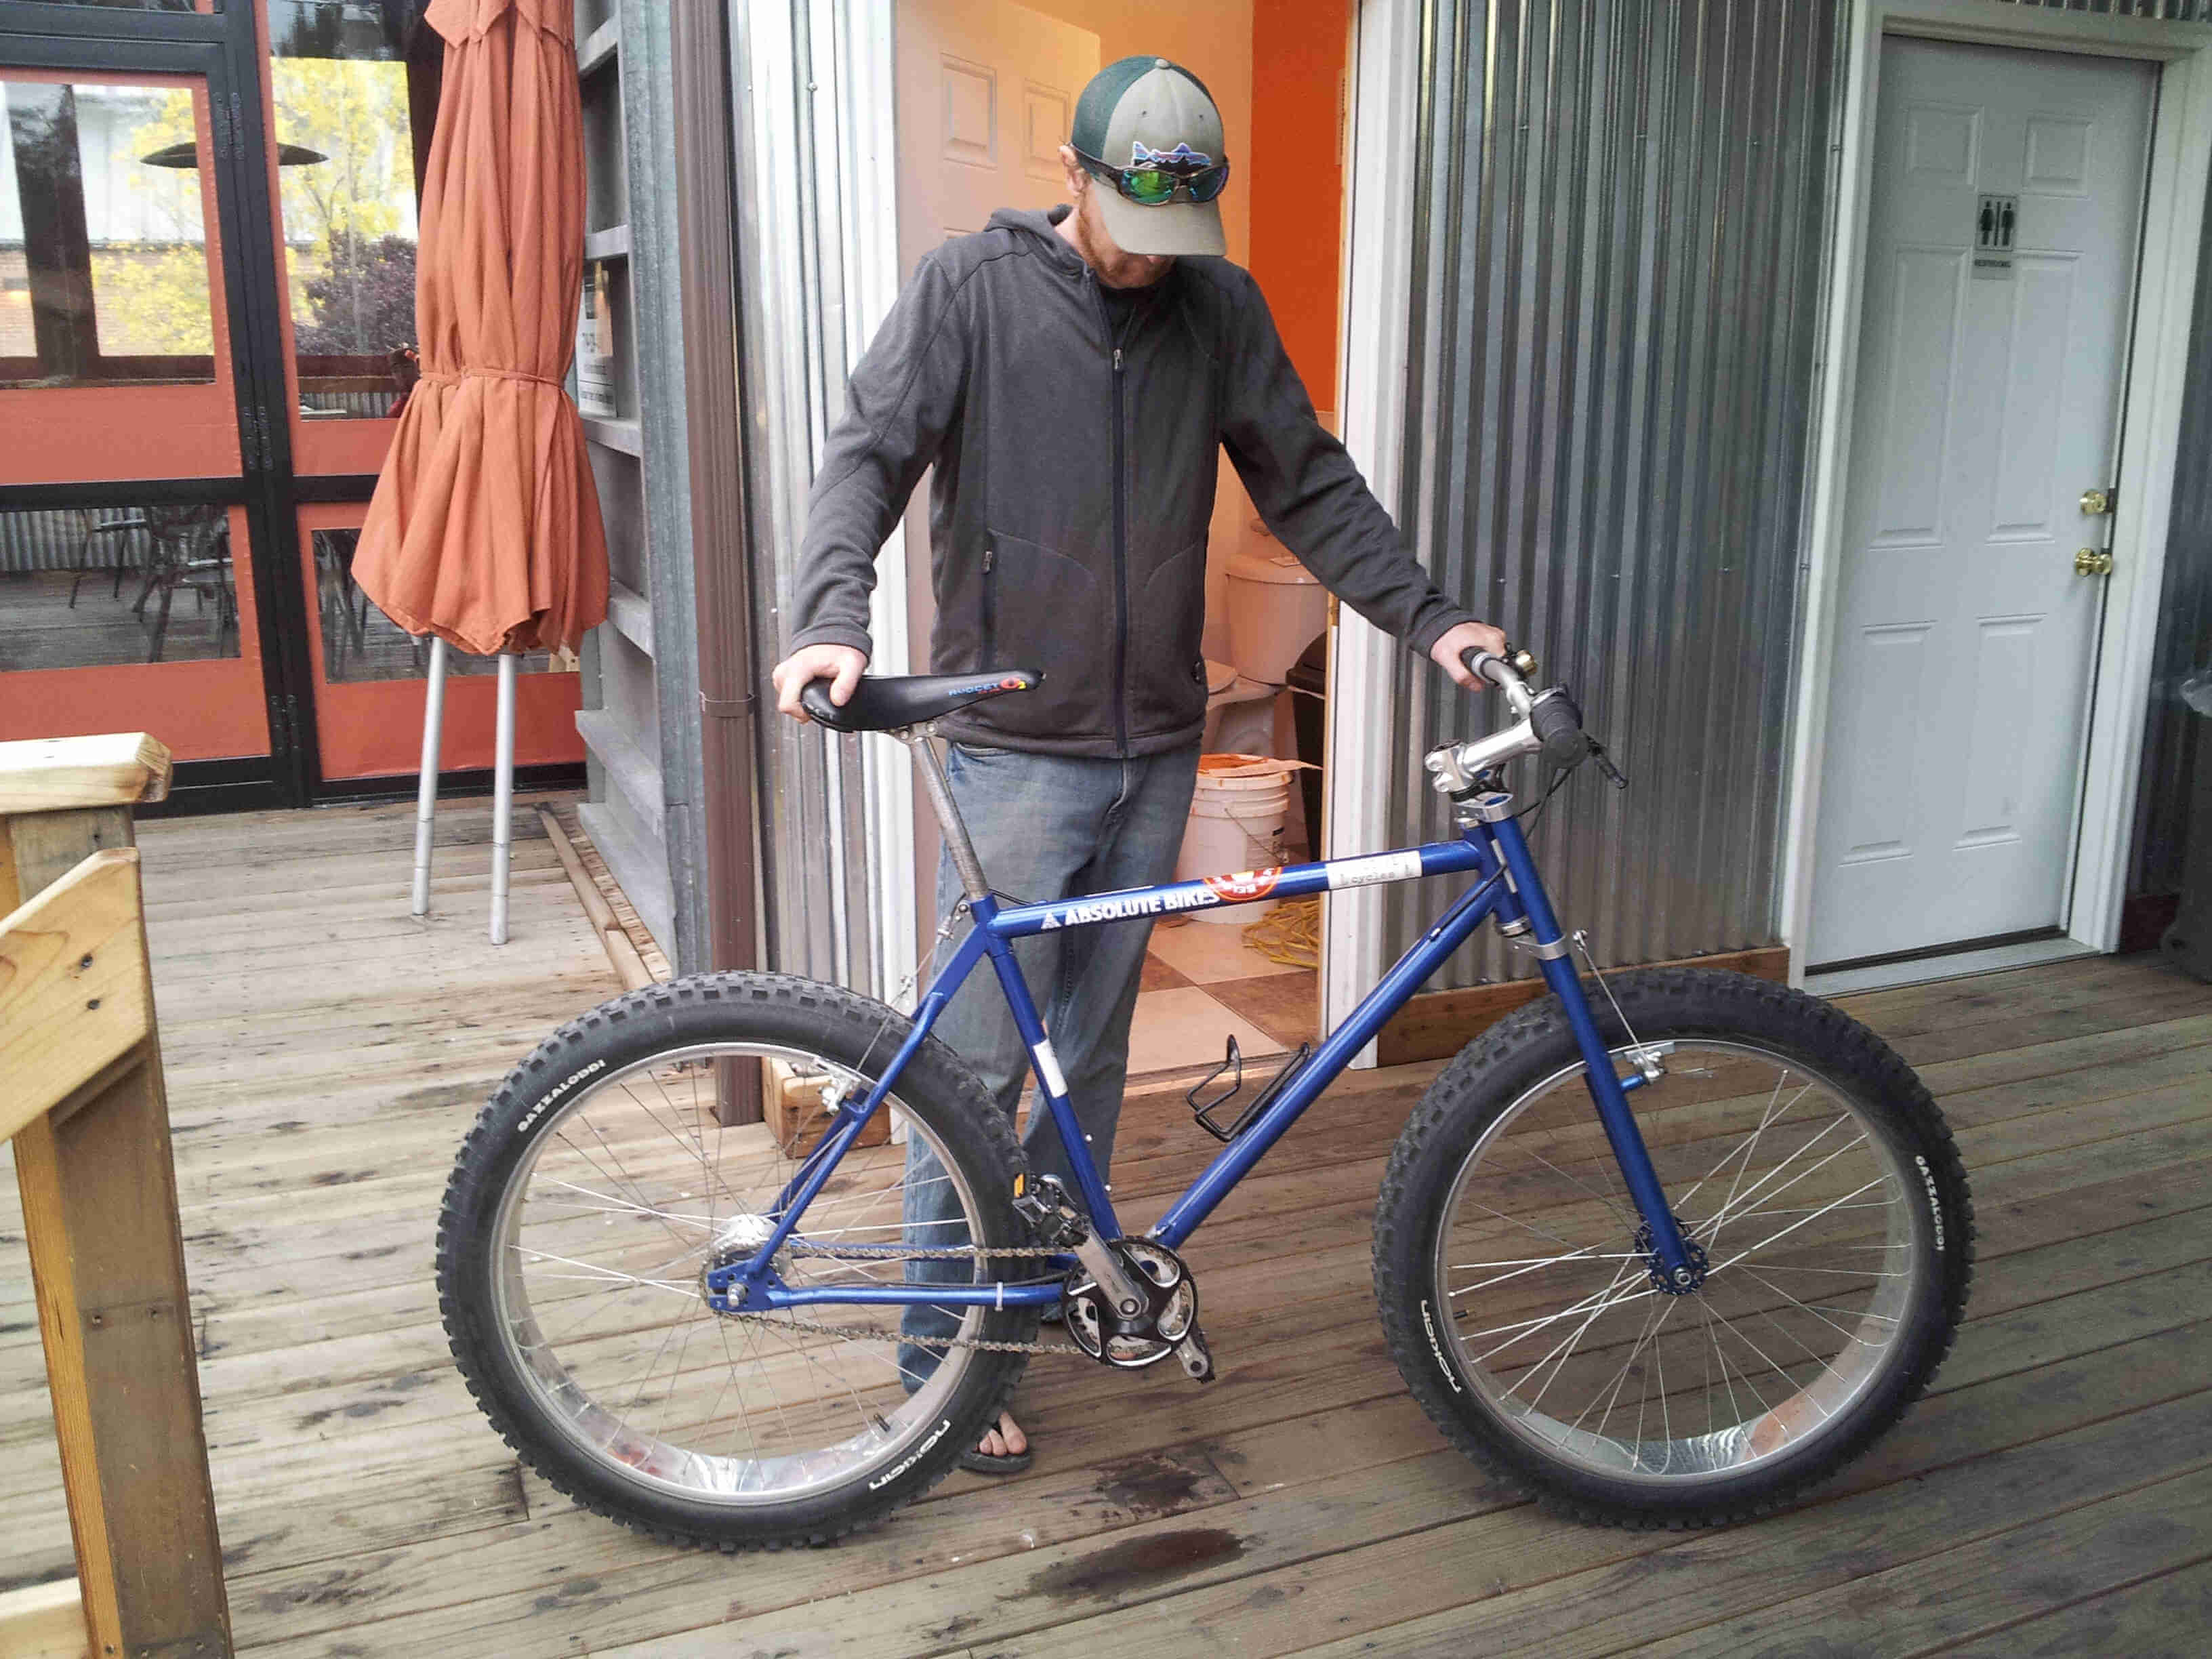 Right side view of a blue bike with a cyclist standing behind, on a wood deck patio outside of a building